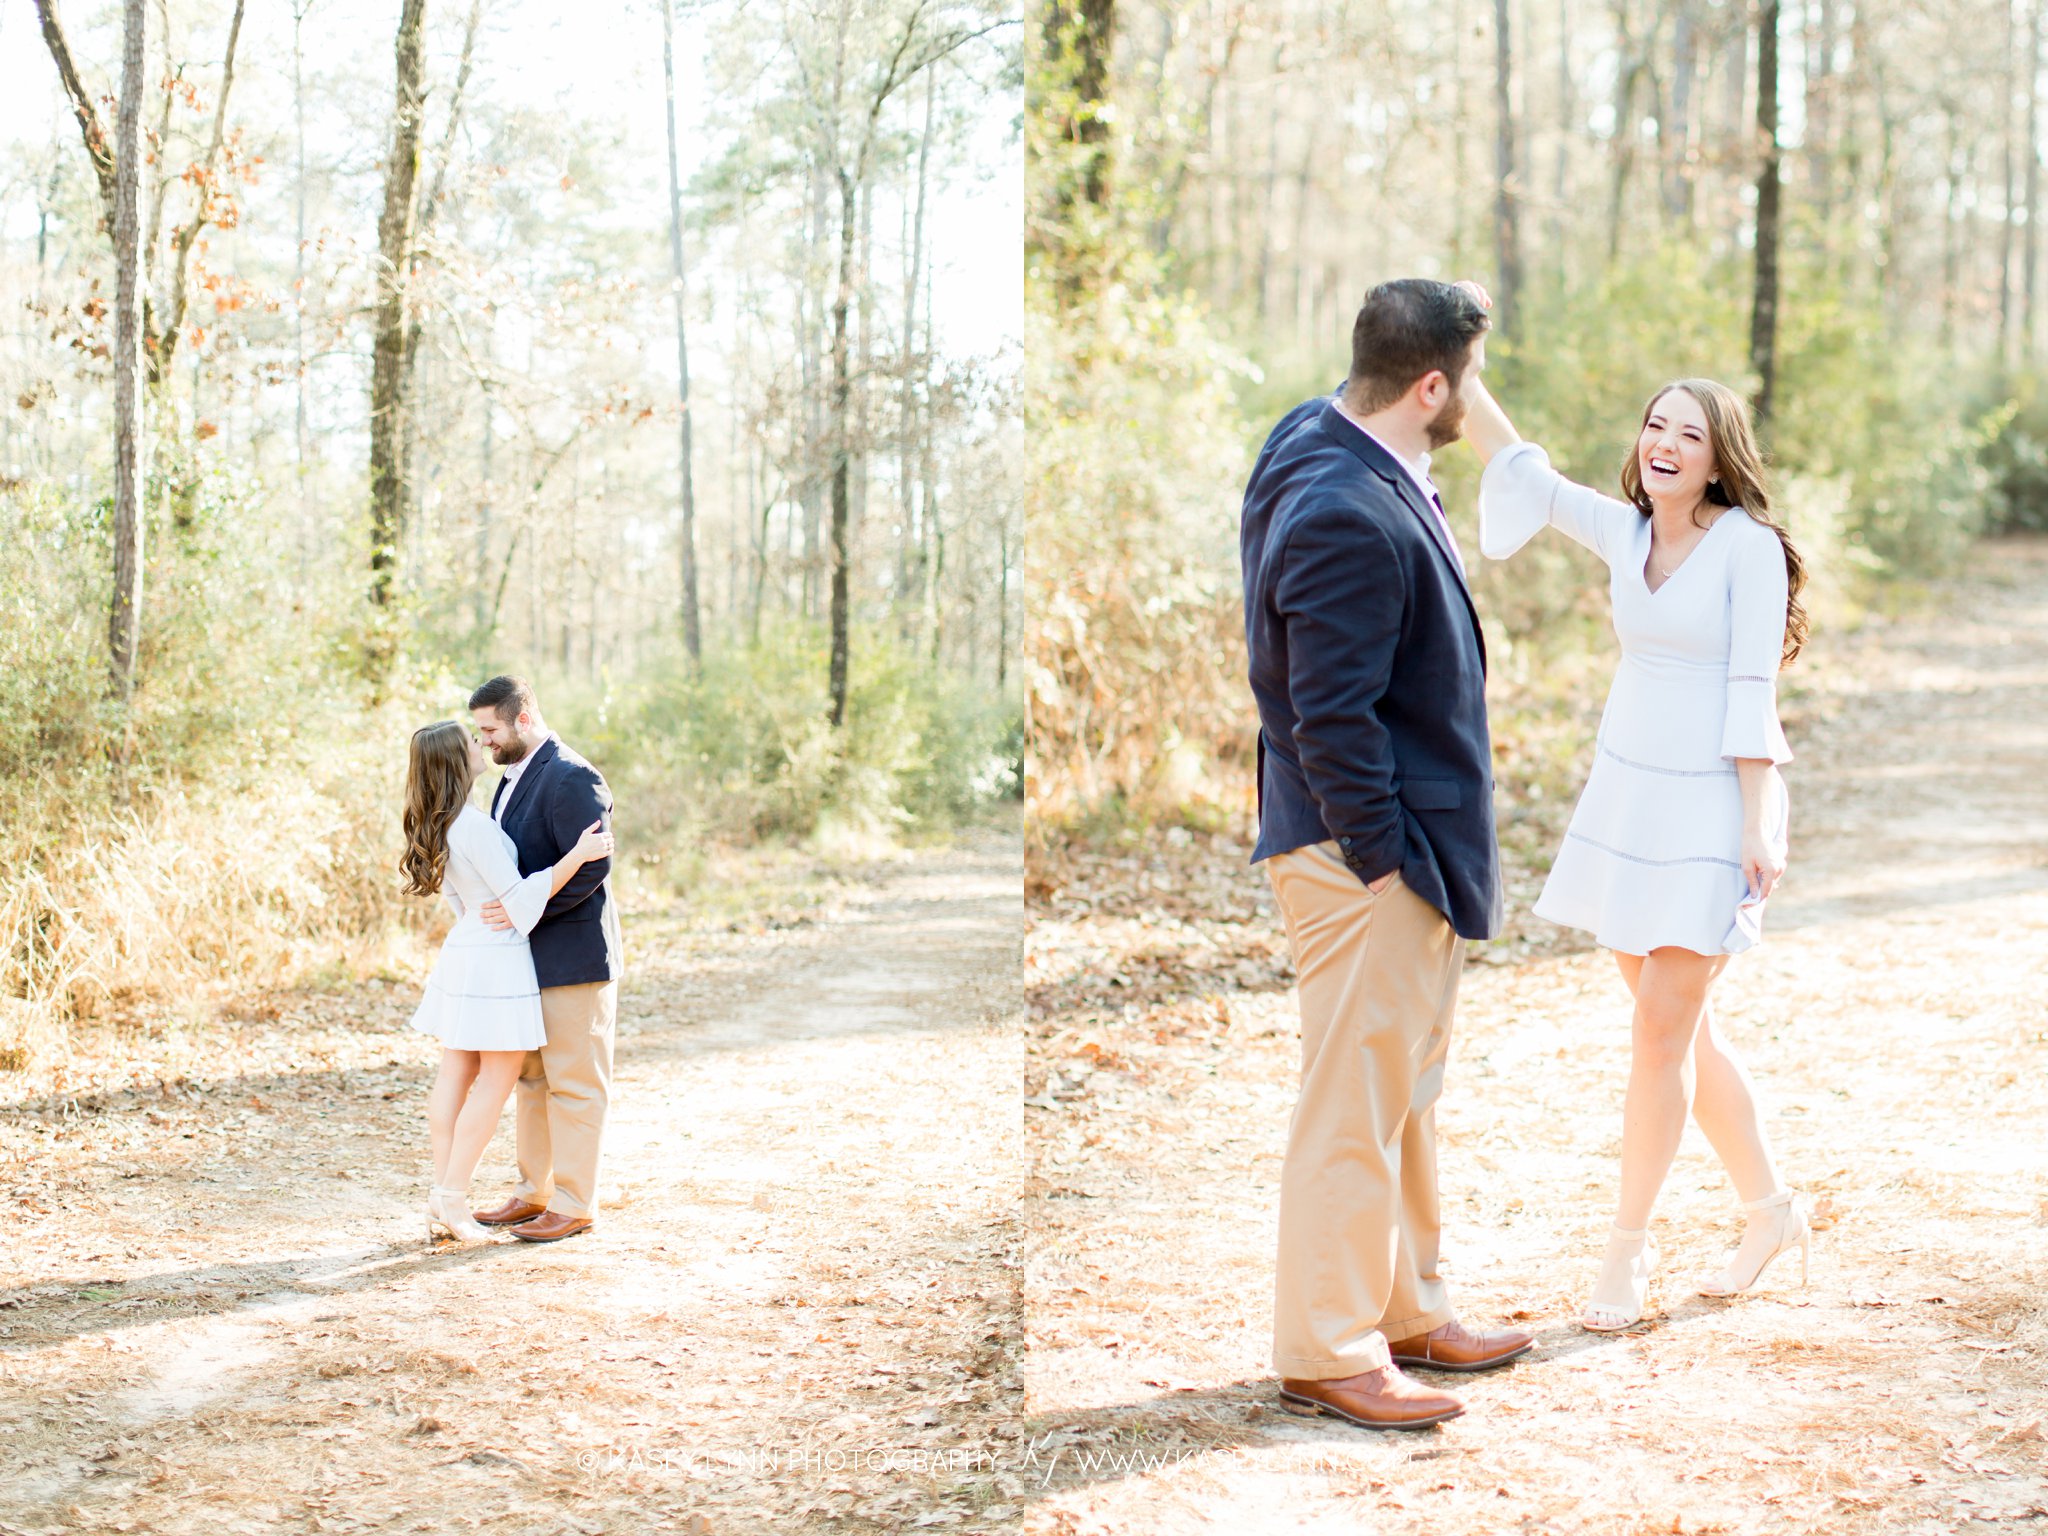 The Woodlands TX Engagement Session / Kasey Lynn Photography